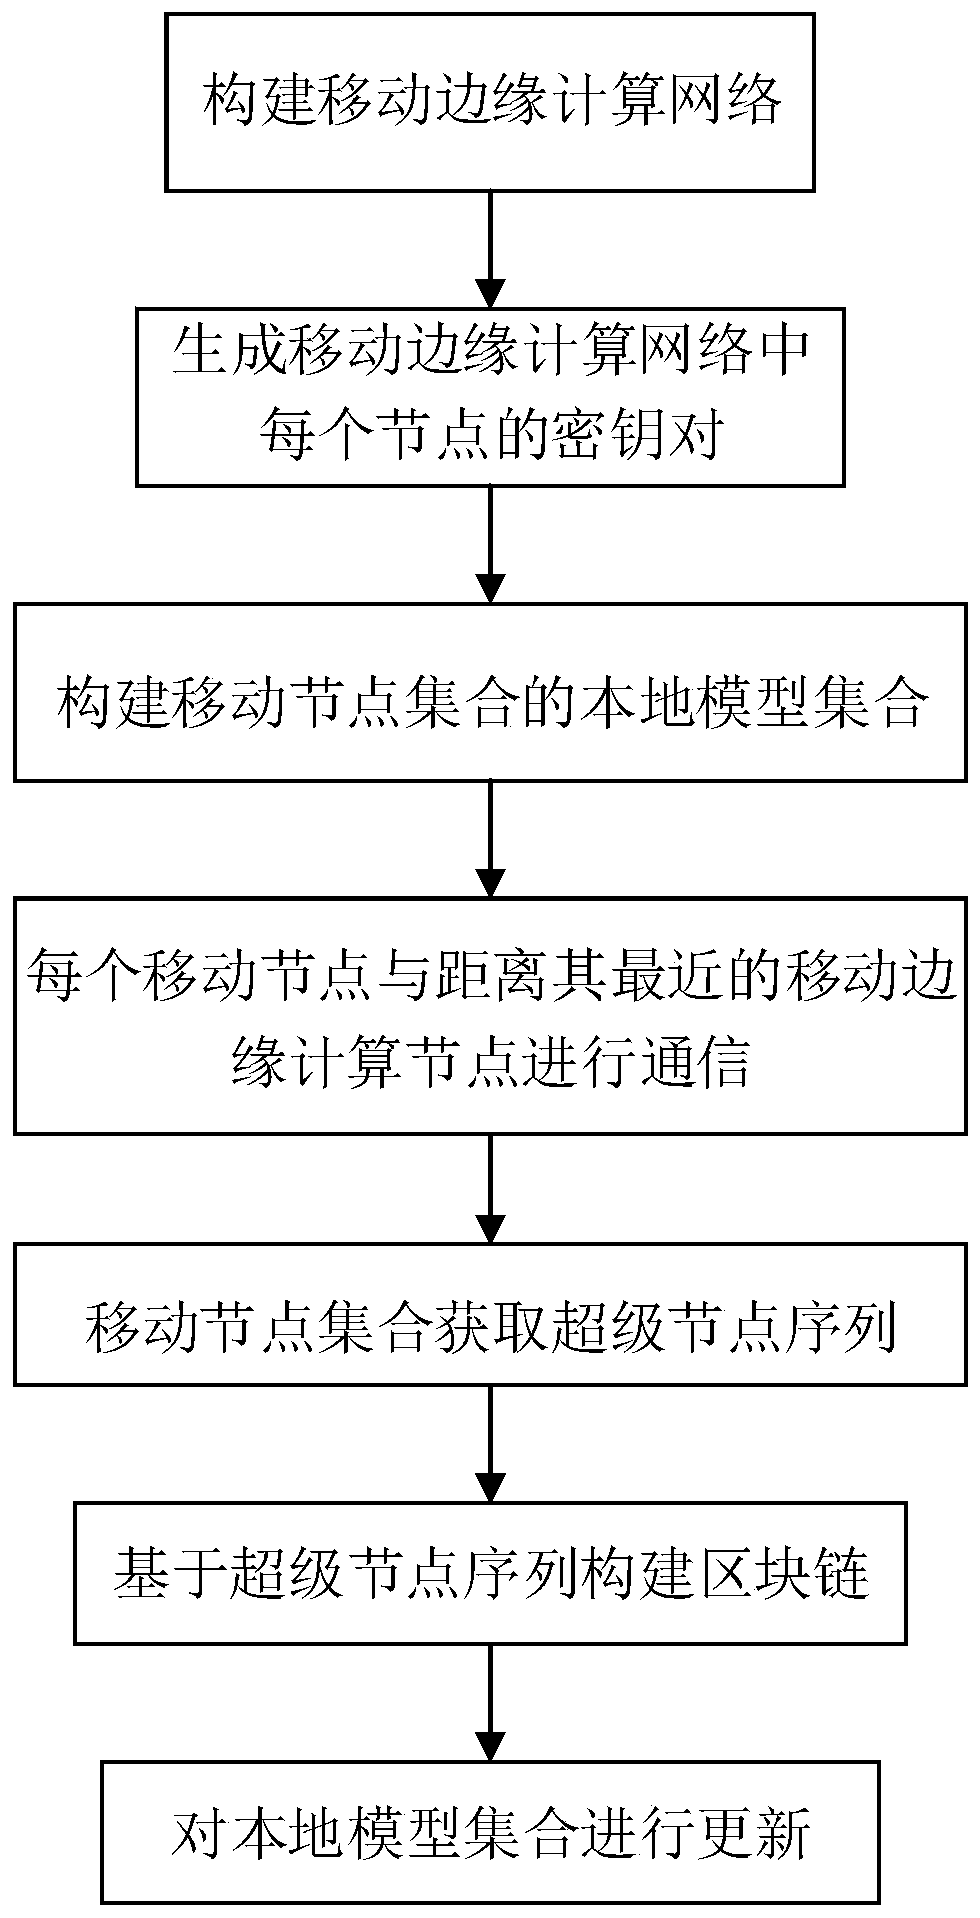 Automatic driving automobile model sharing method applying block chain